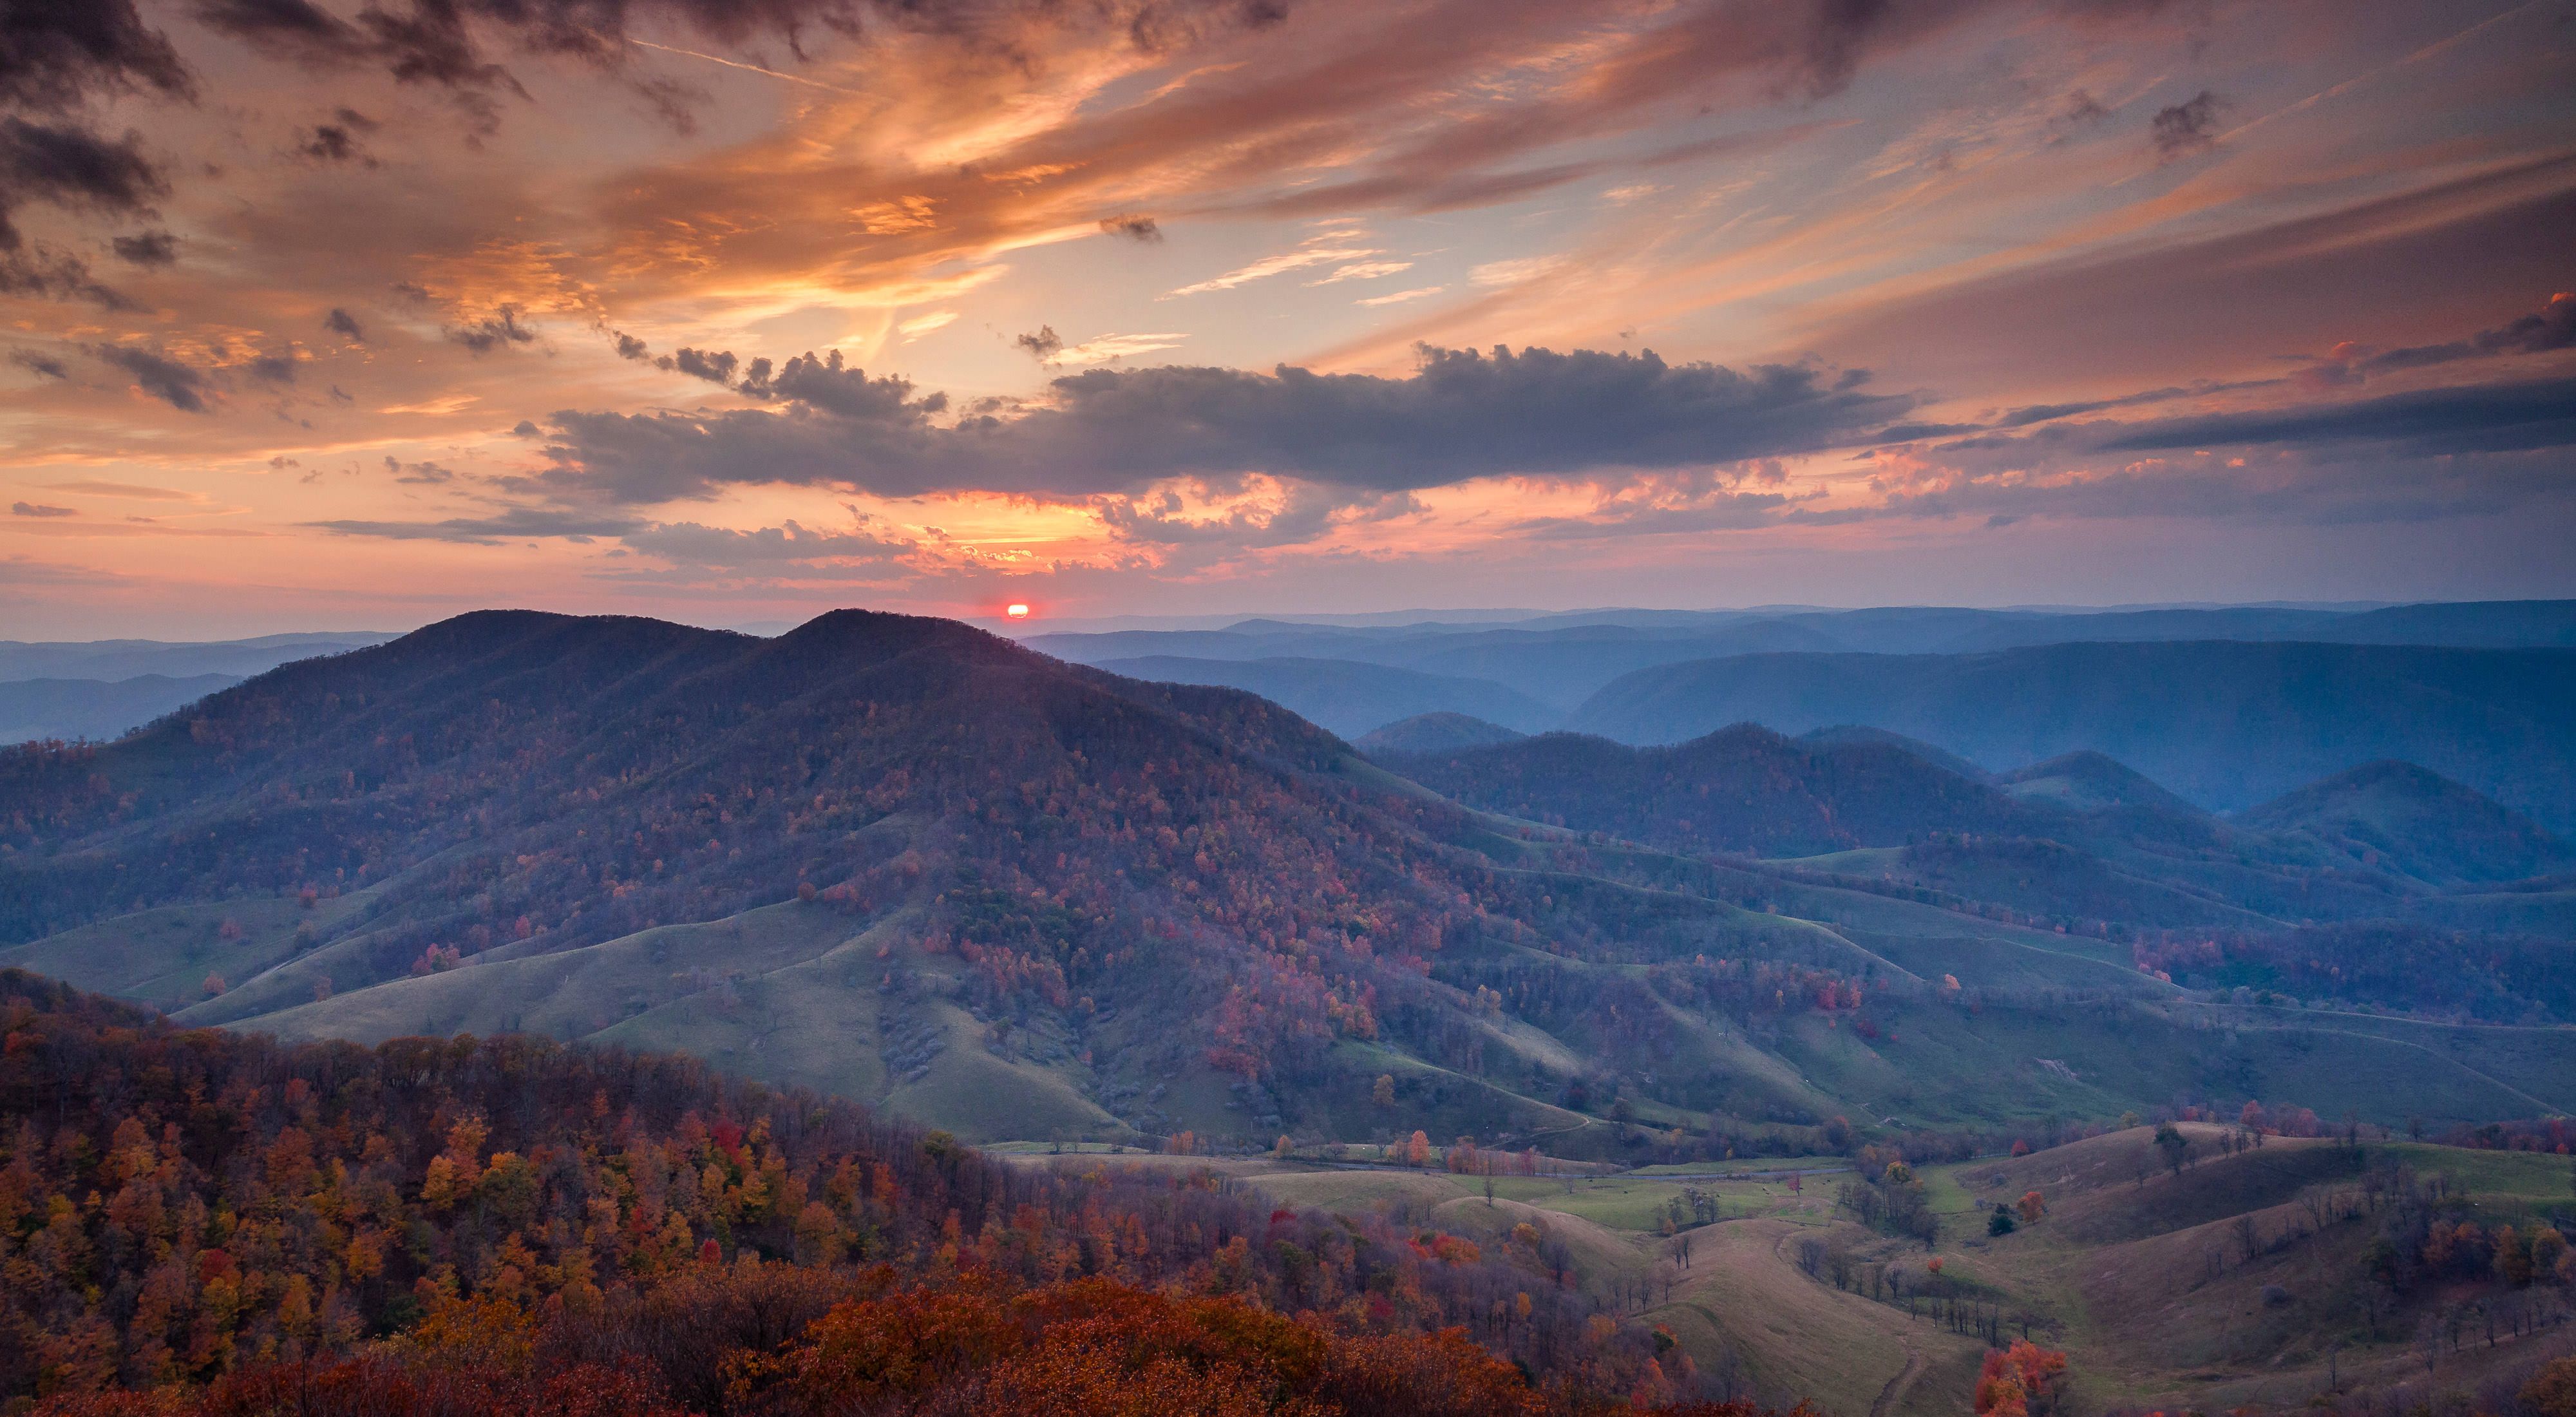 The Nature Conservancy's Panther Knob Preserve in West Virginia